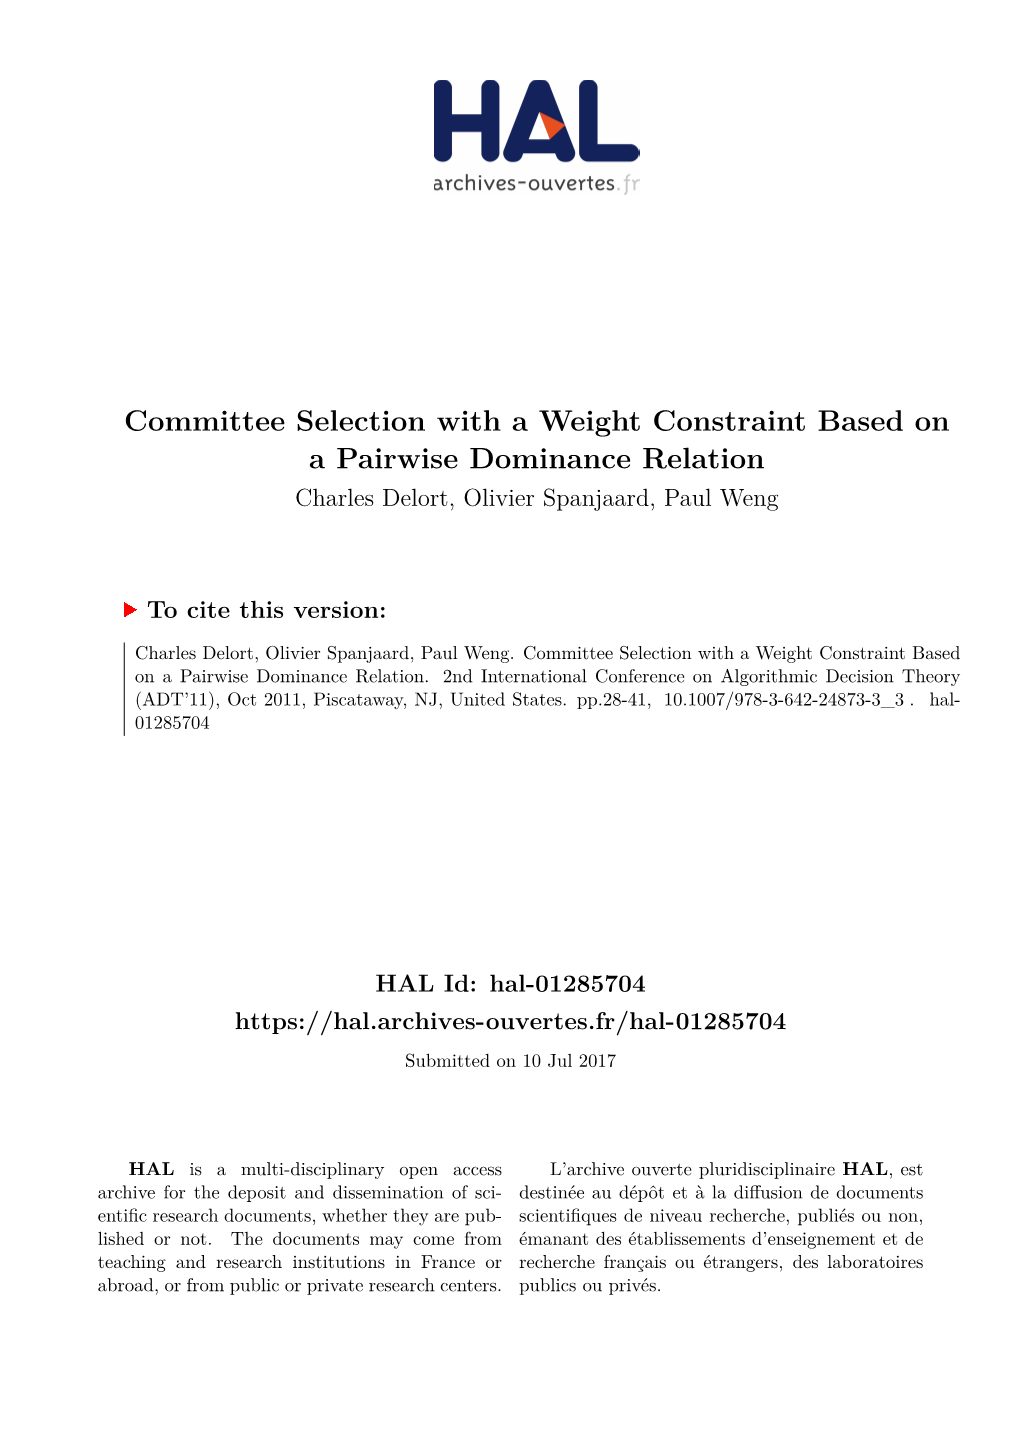 Committee Selection with a Weight Constraint Based on a Pairwise Dominance Relation Charles Delort, Olivier Spanjaard, Paul Weng